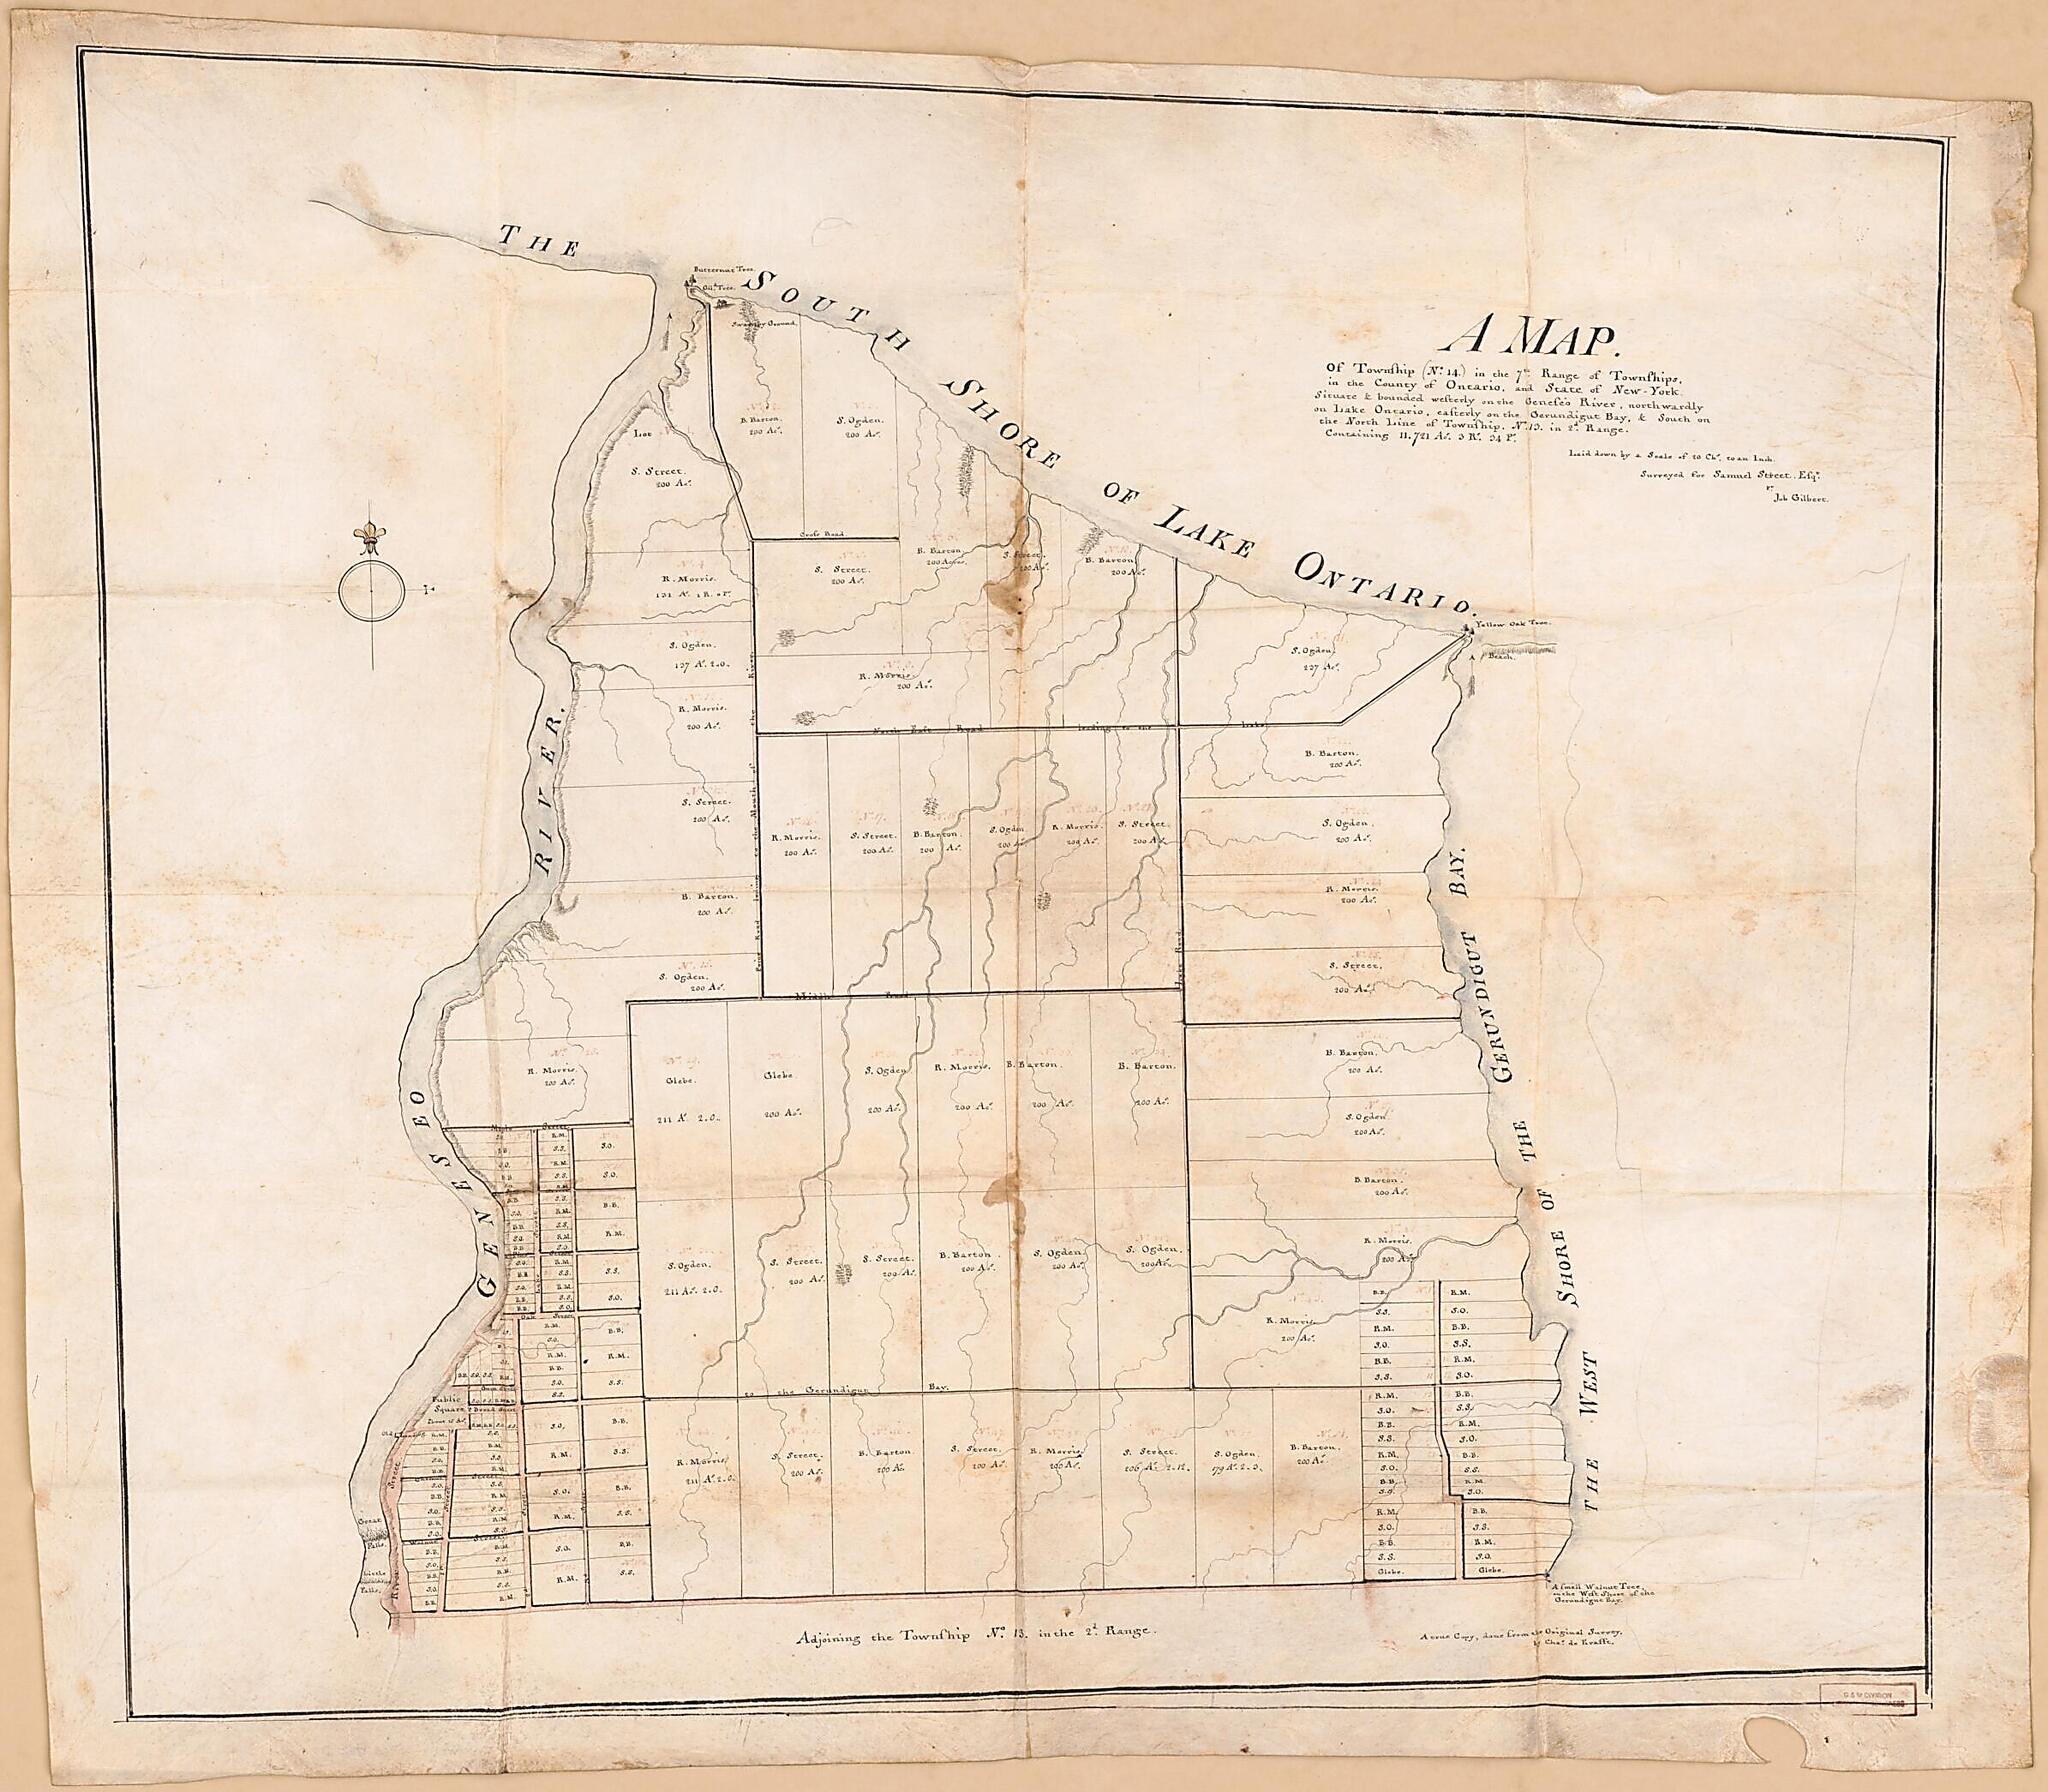 This old map of A Map of Township (No. 14) In the 7th Range of Townships, In the County of Ontario, and State of New York : Situate &amp; Bounded Westerly On the Geneseo River, Northwardly On Lake Ontario, Easterly On the Gerundigut Bay, &amp; South On the North